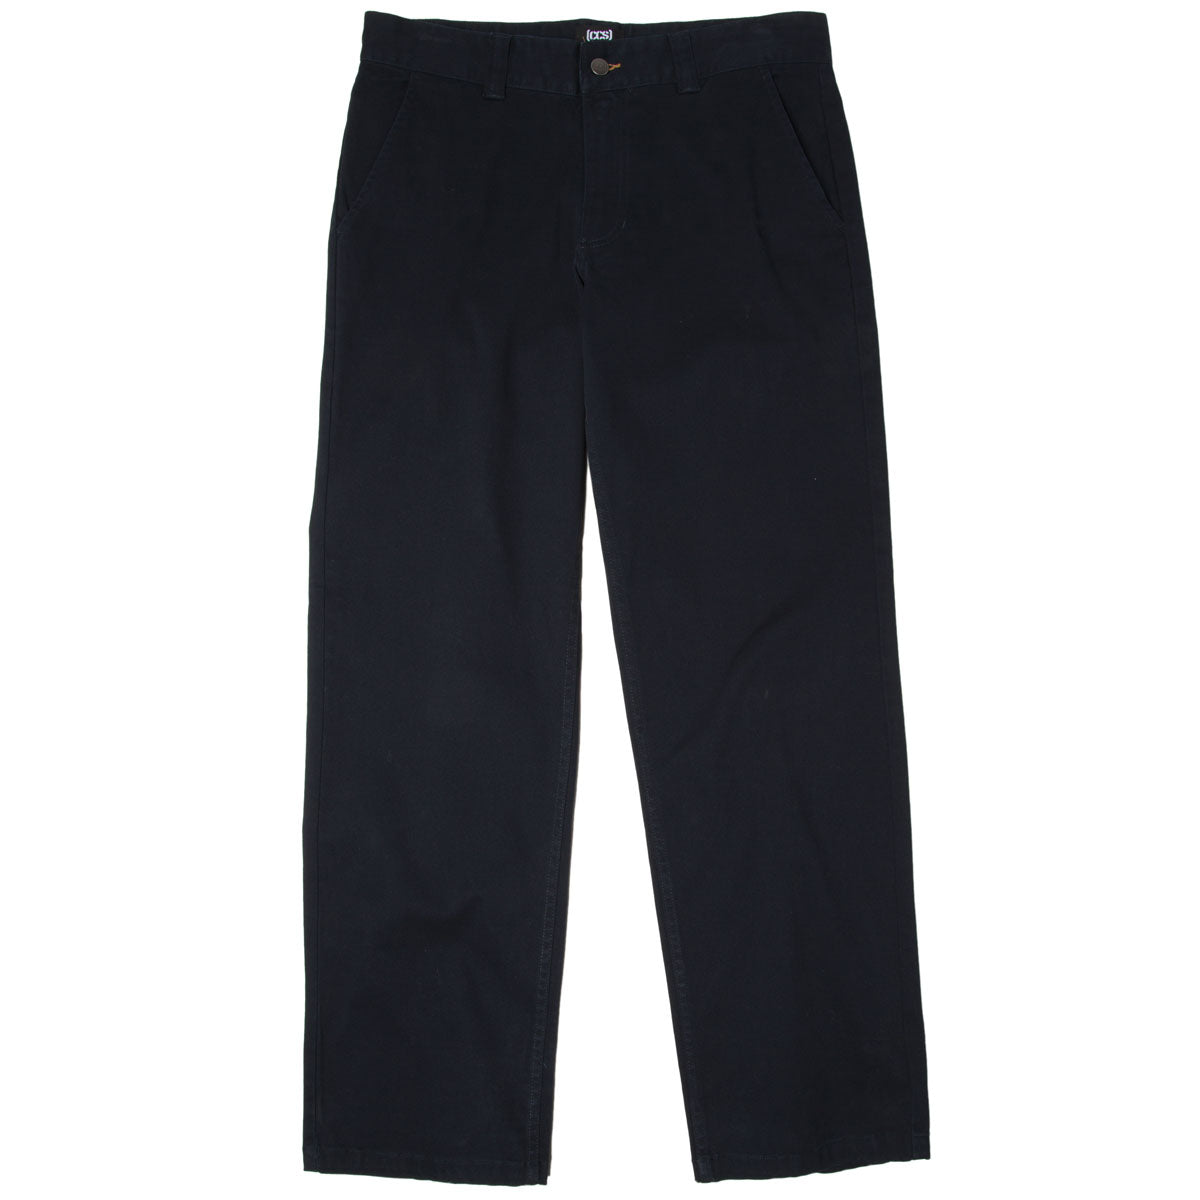 CCS Standard Plus Relaxed Chino Pants - Navy image 5